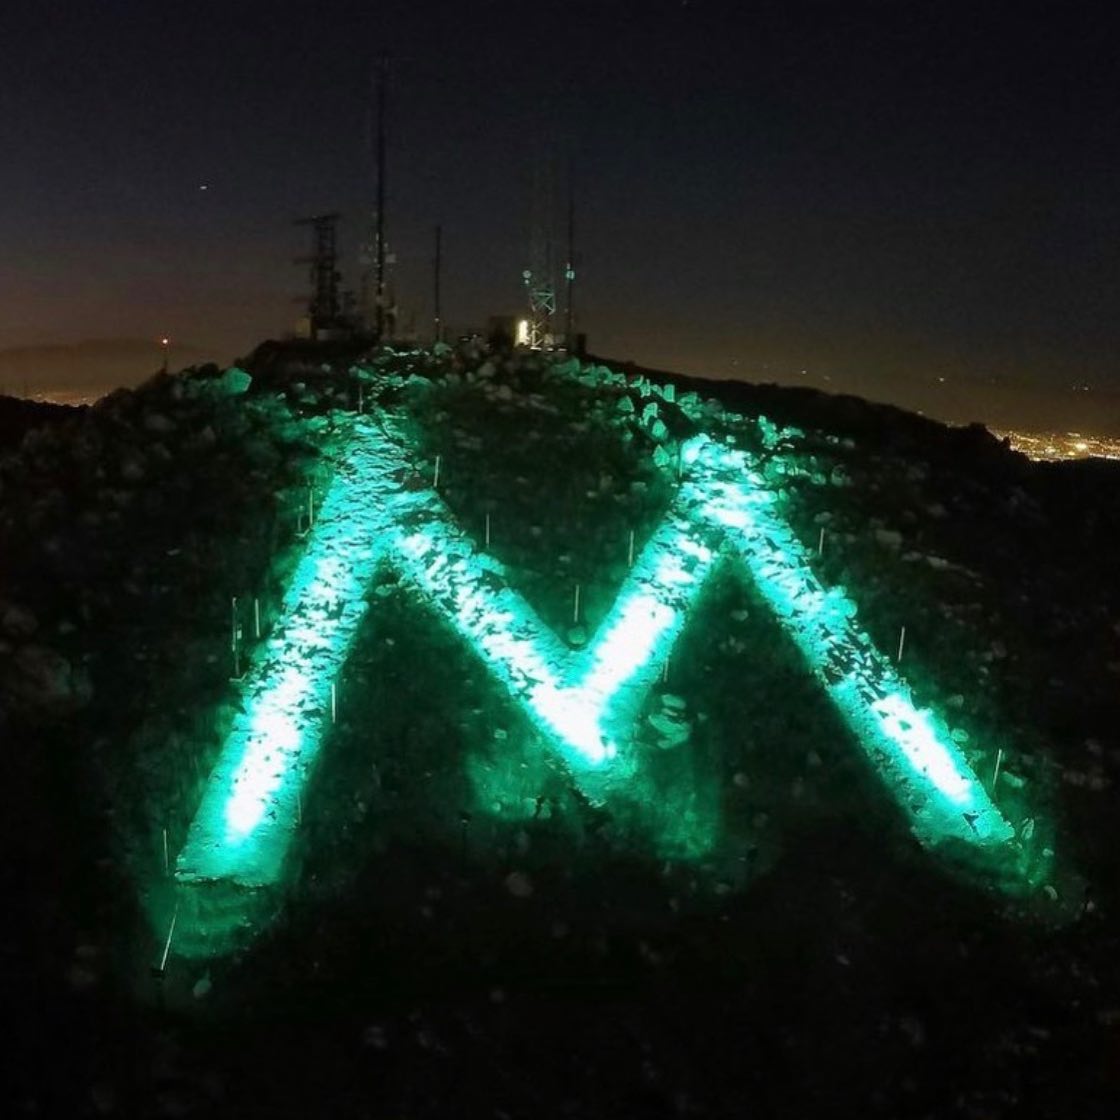 Tonight, the M on Box Springs Mountain will be lit green in honor of Earth Day.
.
.
.
#morenovalley #ilovemoval #mlighting #earthday #conservation